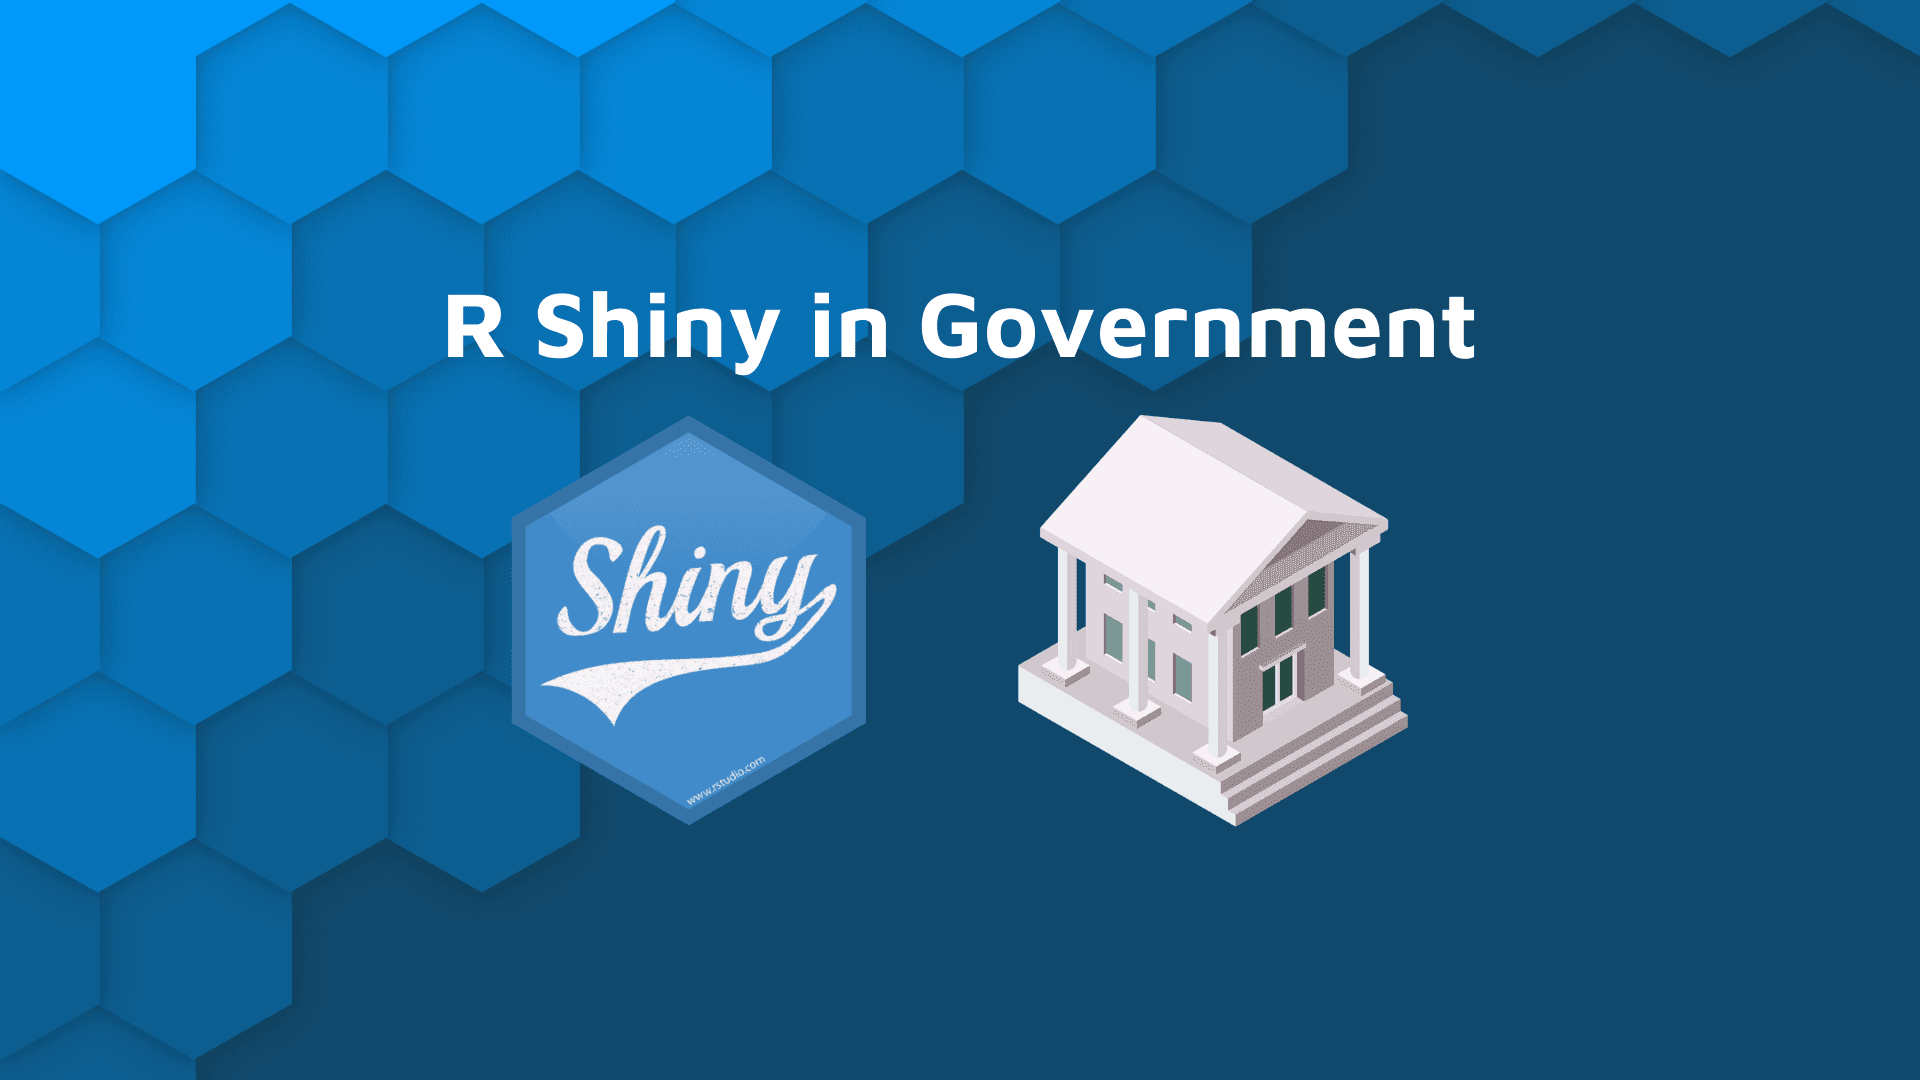 'r shiny in government' with shiny logo and government building icon